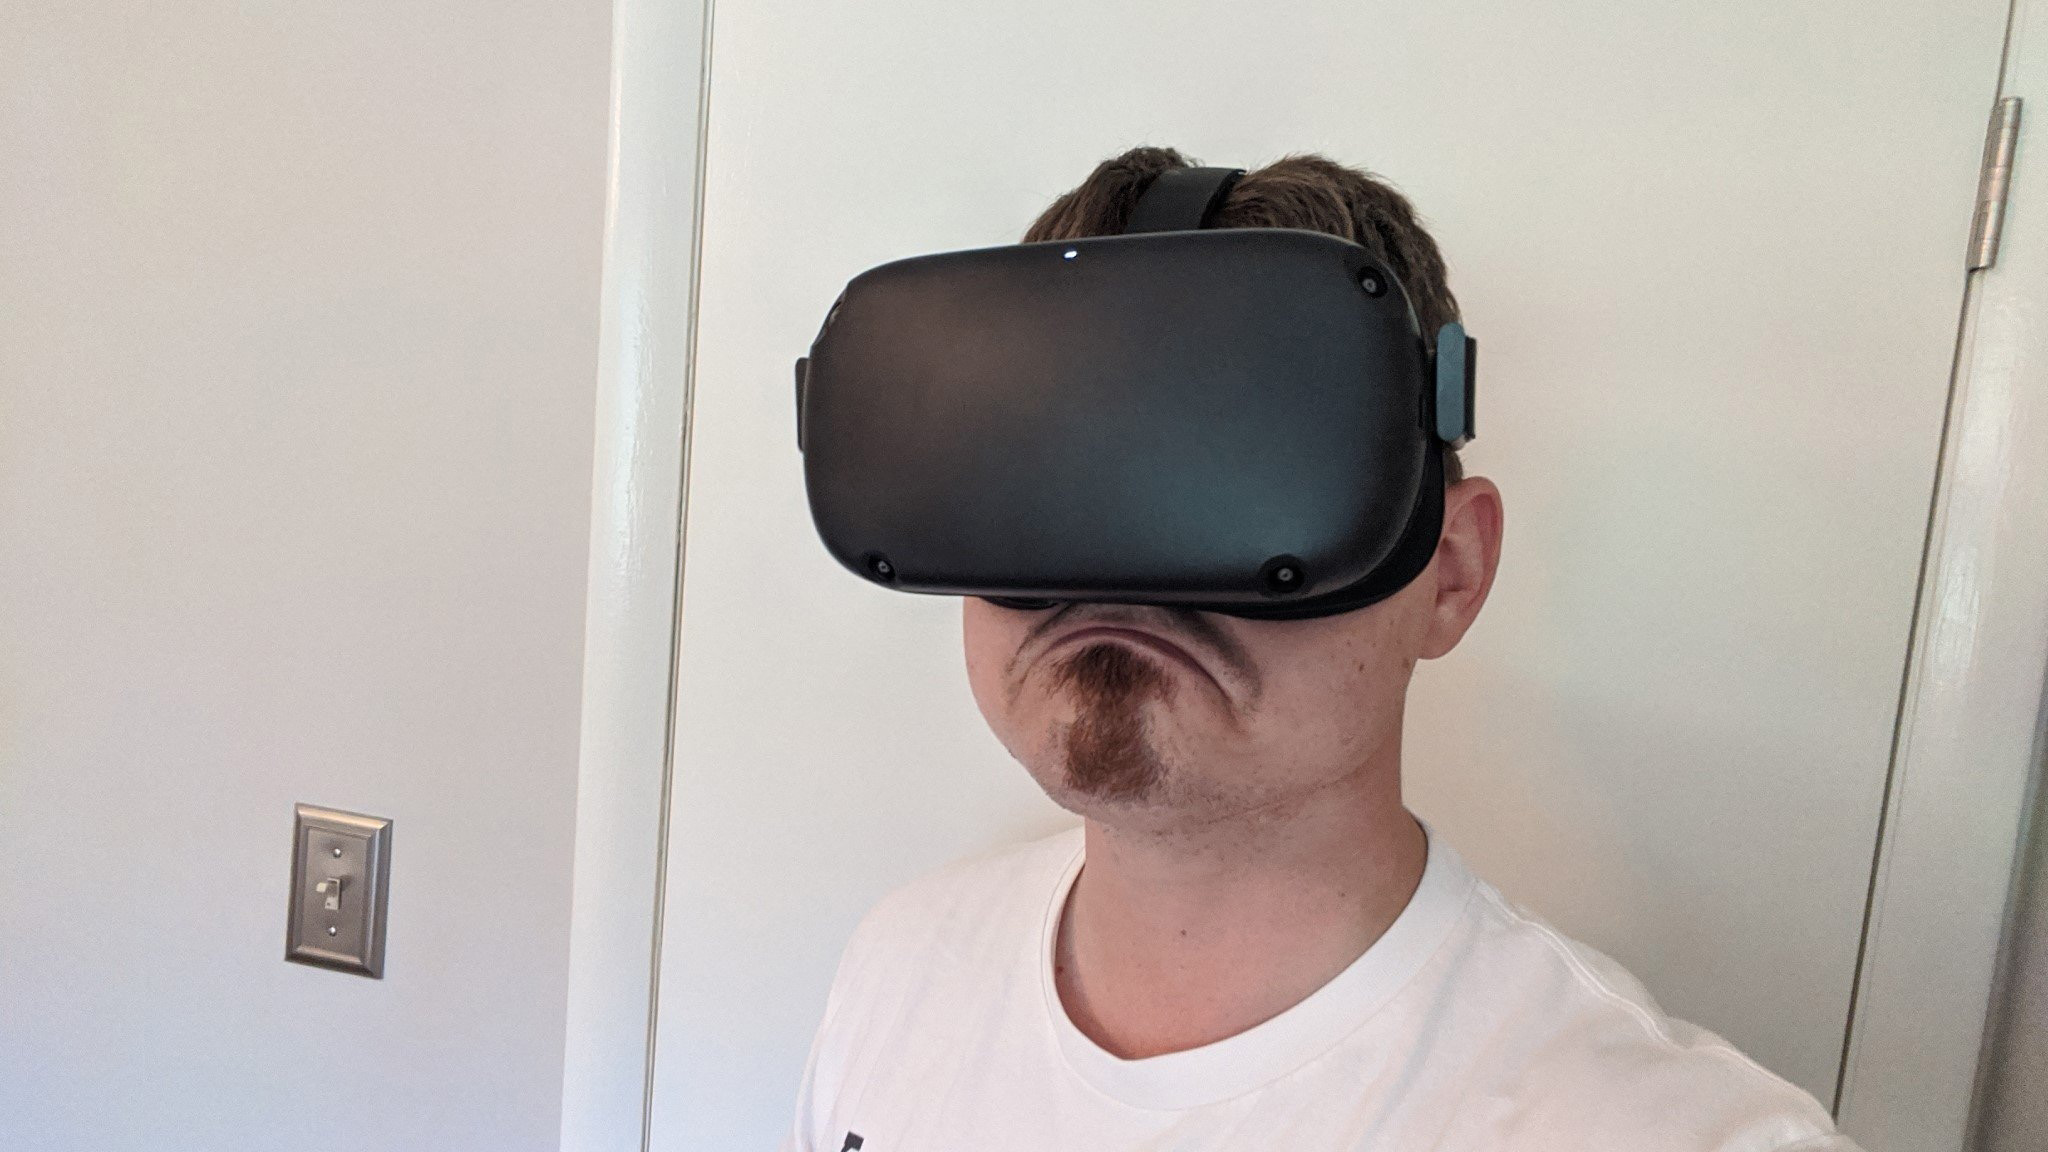 Making a sad face while wearing an Oculus Quest